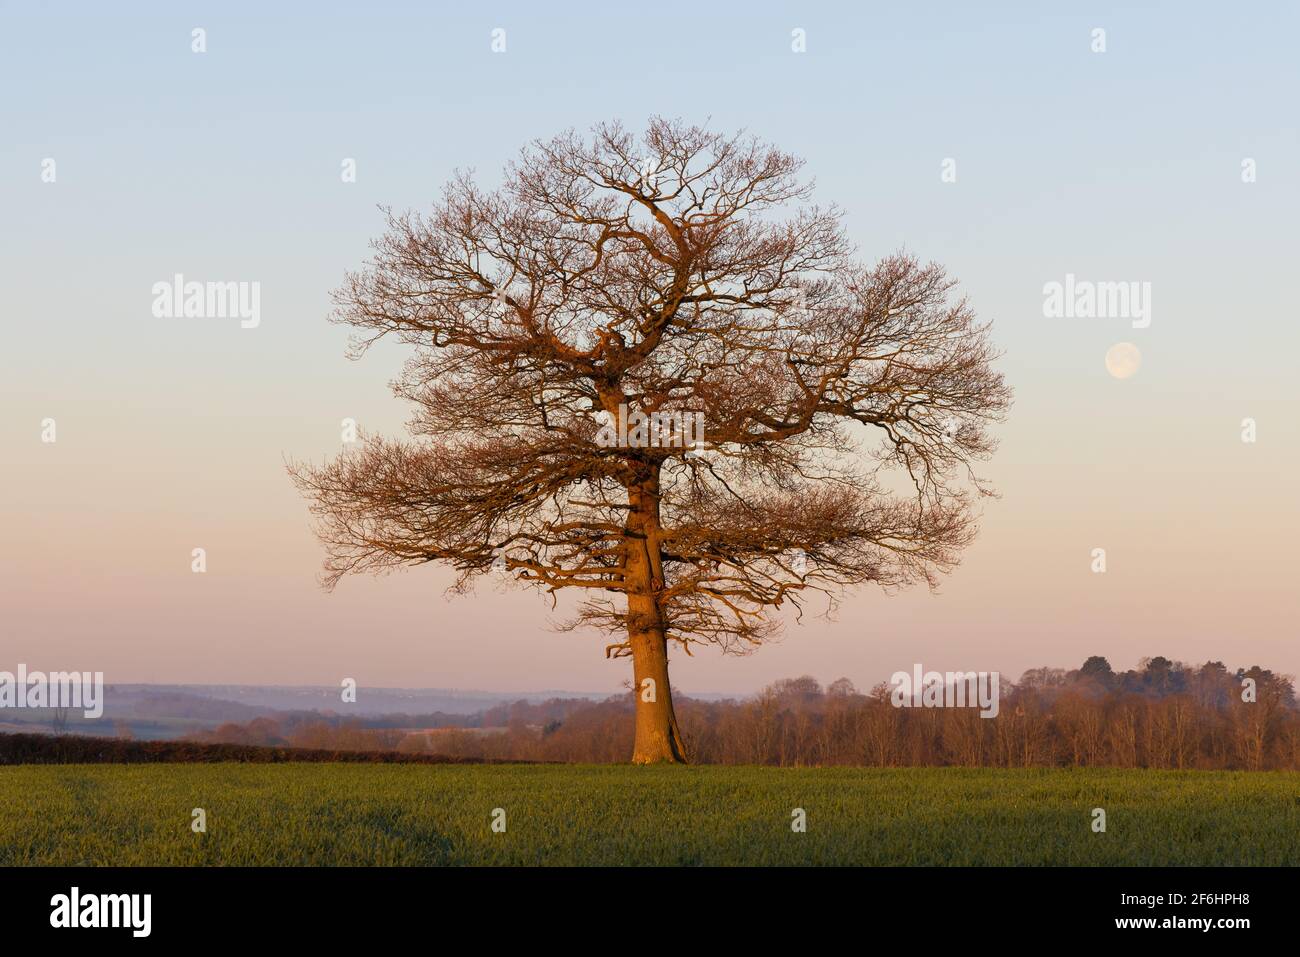 Solitary oak tree in a field at sunrise on a cold spring morning with a clear blue sky and the moon in the background. Much Hadham, Hertfordshire, UK. Stock Photo